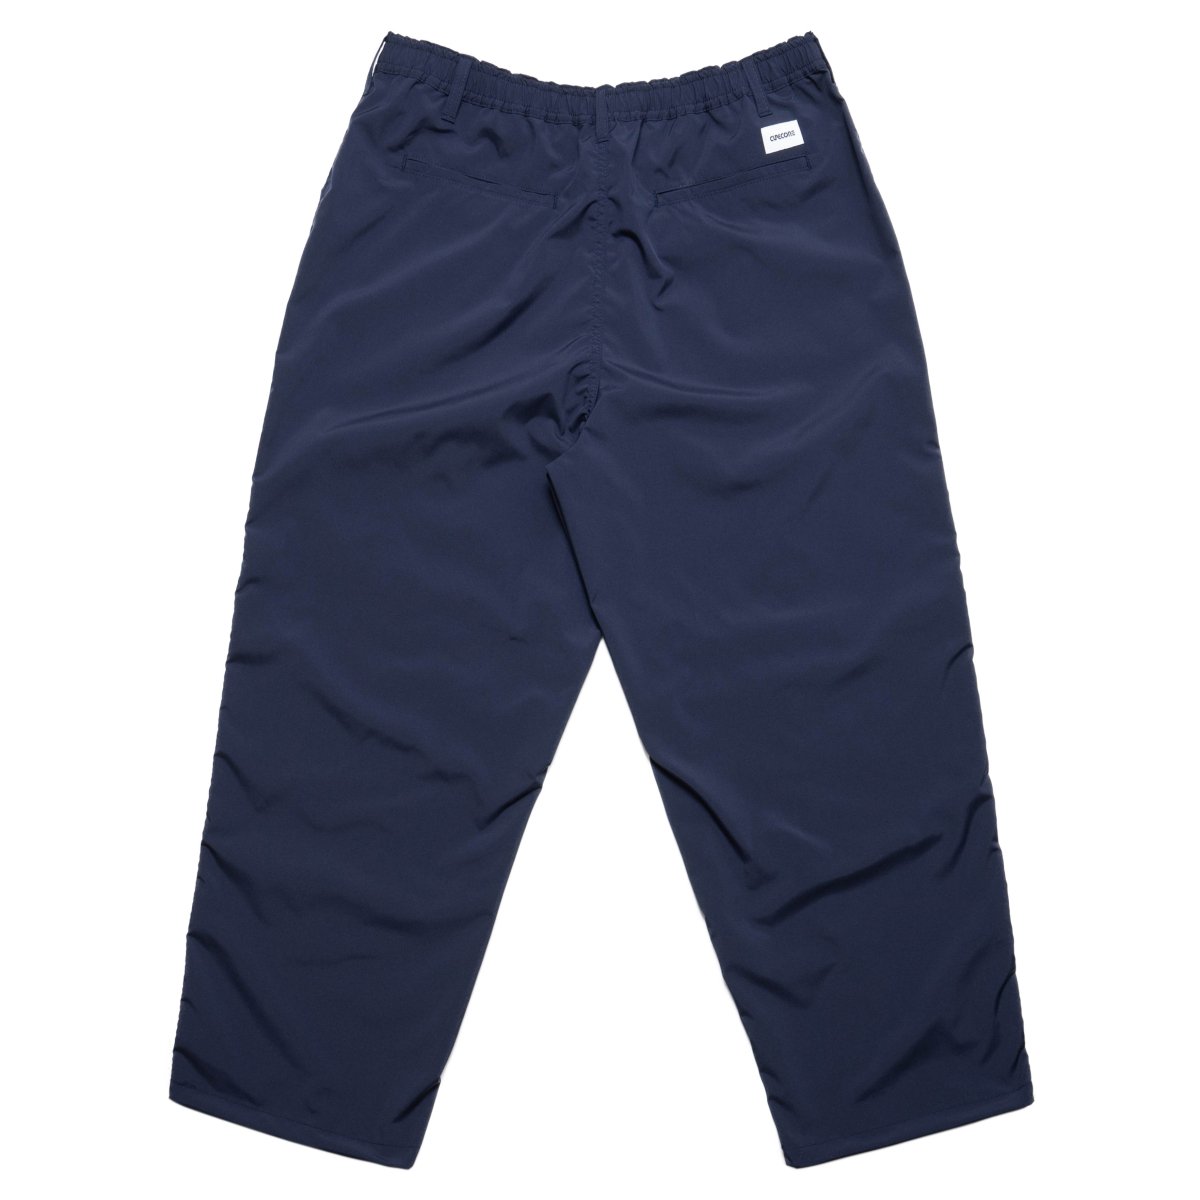 Solotex Baggy Pants - Navy - CUP AND CONE